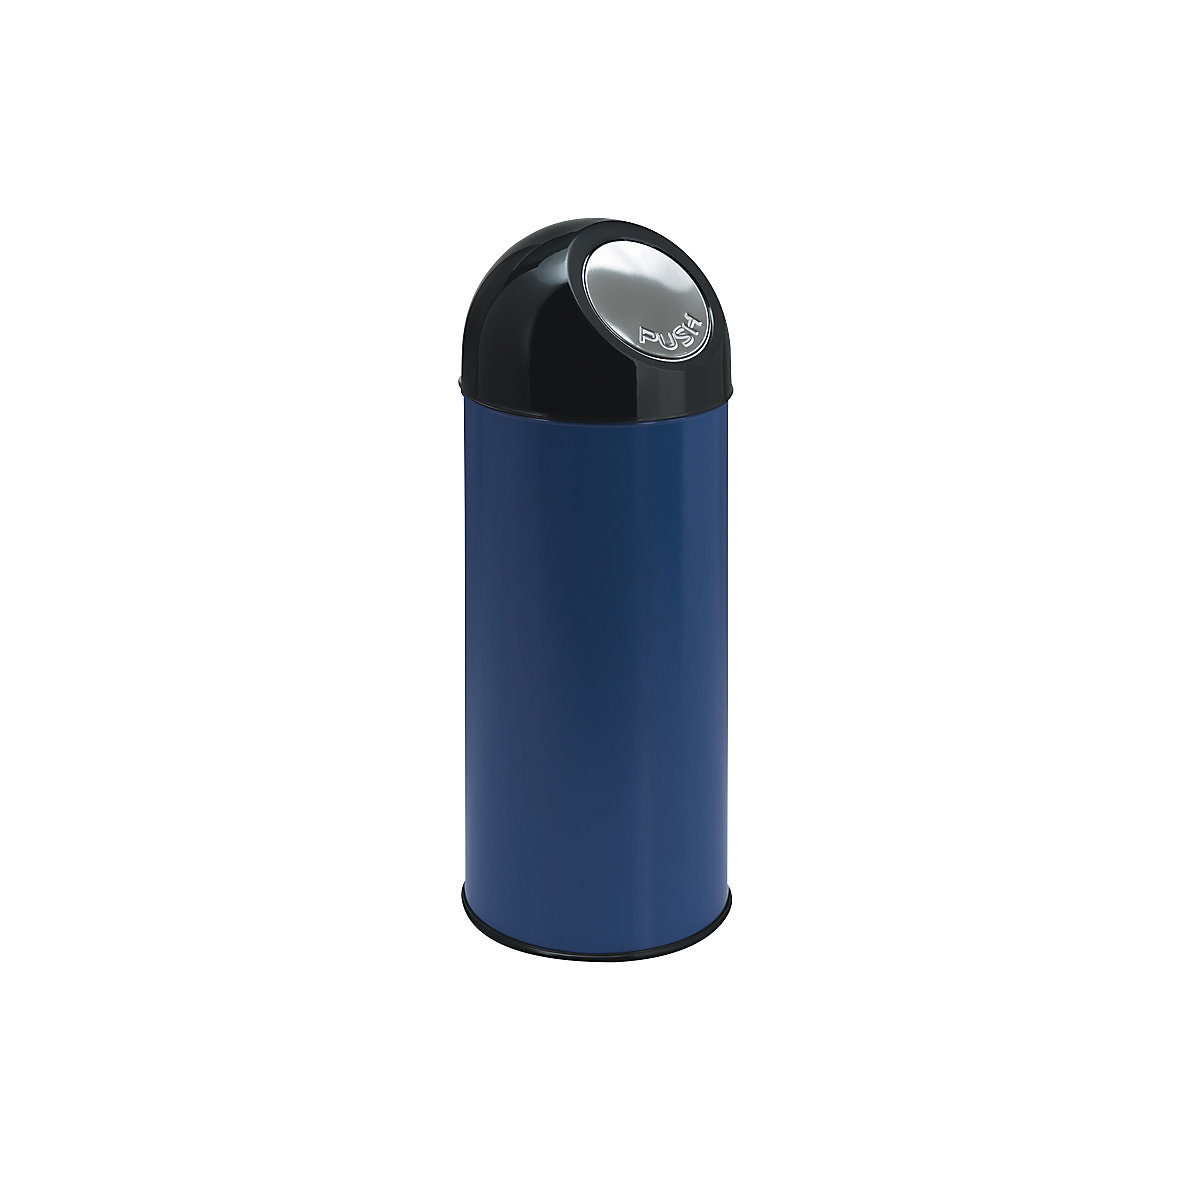 Push rubbish bin, capacity 55 l, zinc plated inner container, blue-7